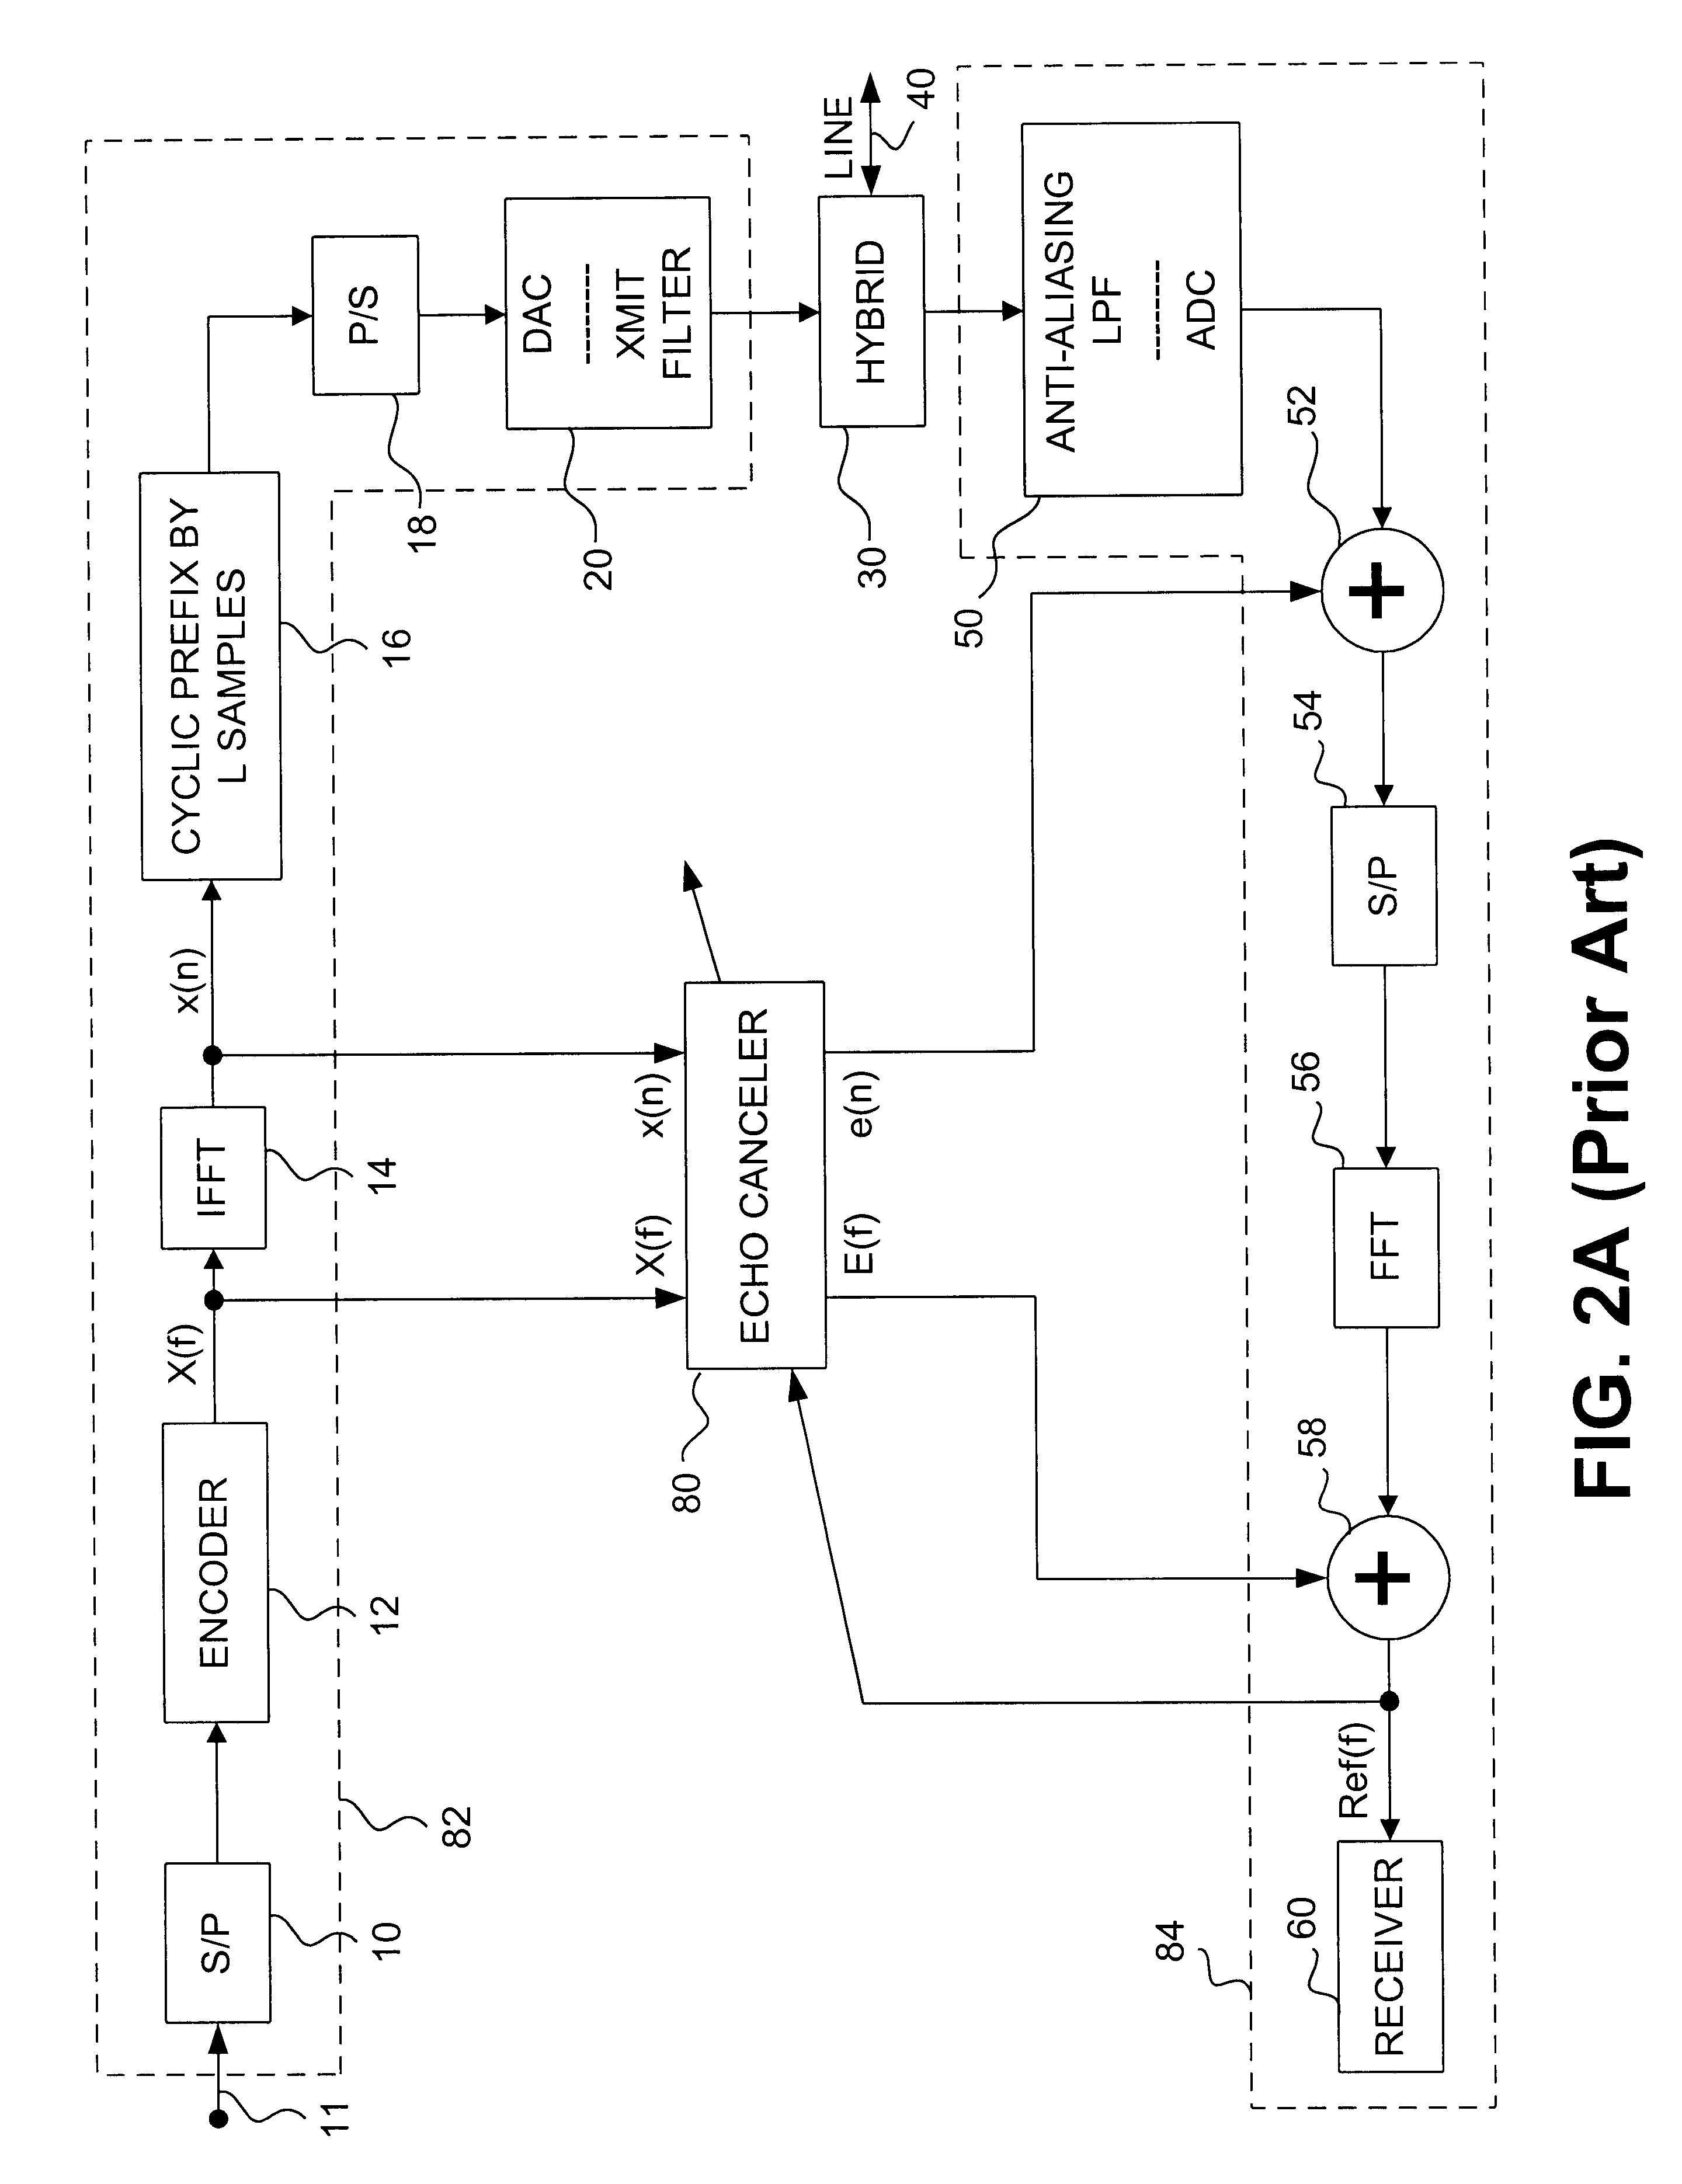 System and method for echo cancellation over asymmetric spectra